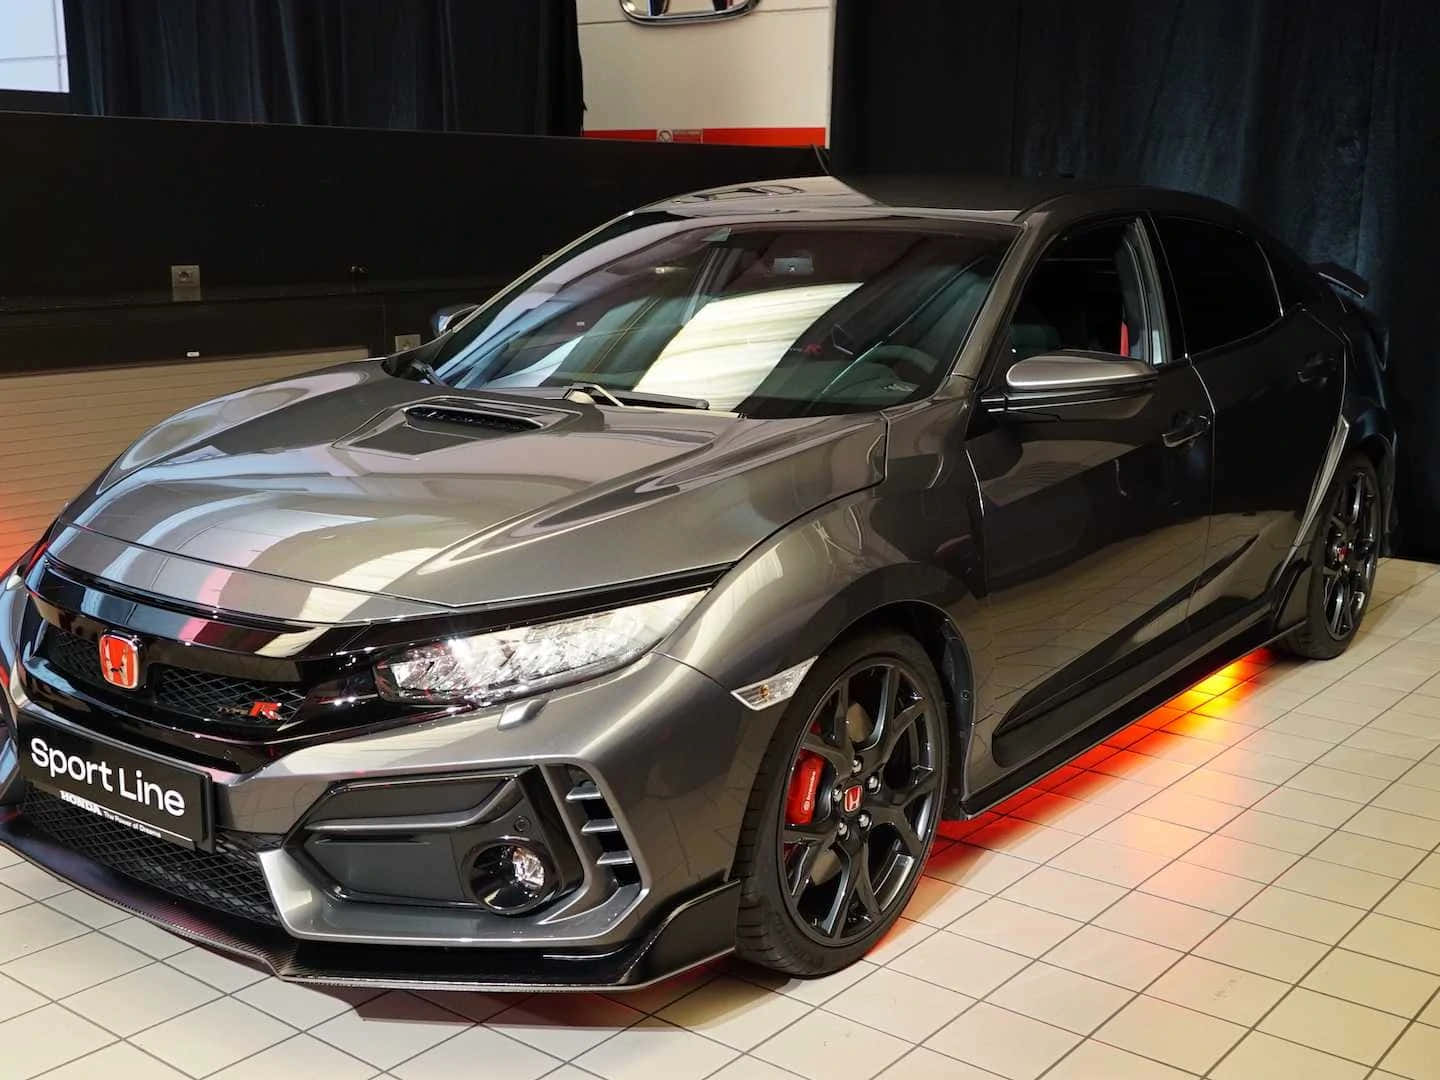 "Take the Thrill of a Honda Civic Type R Ride" Wallpaper